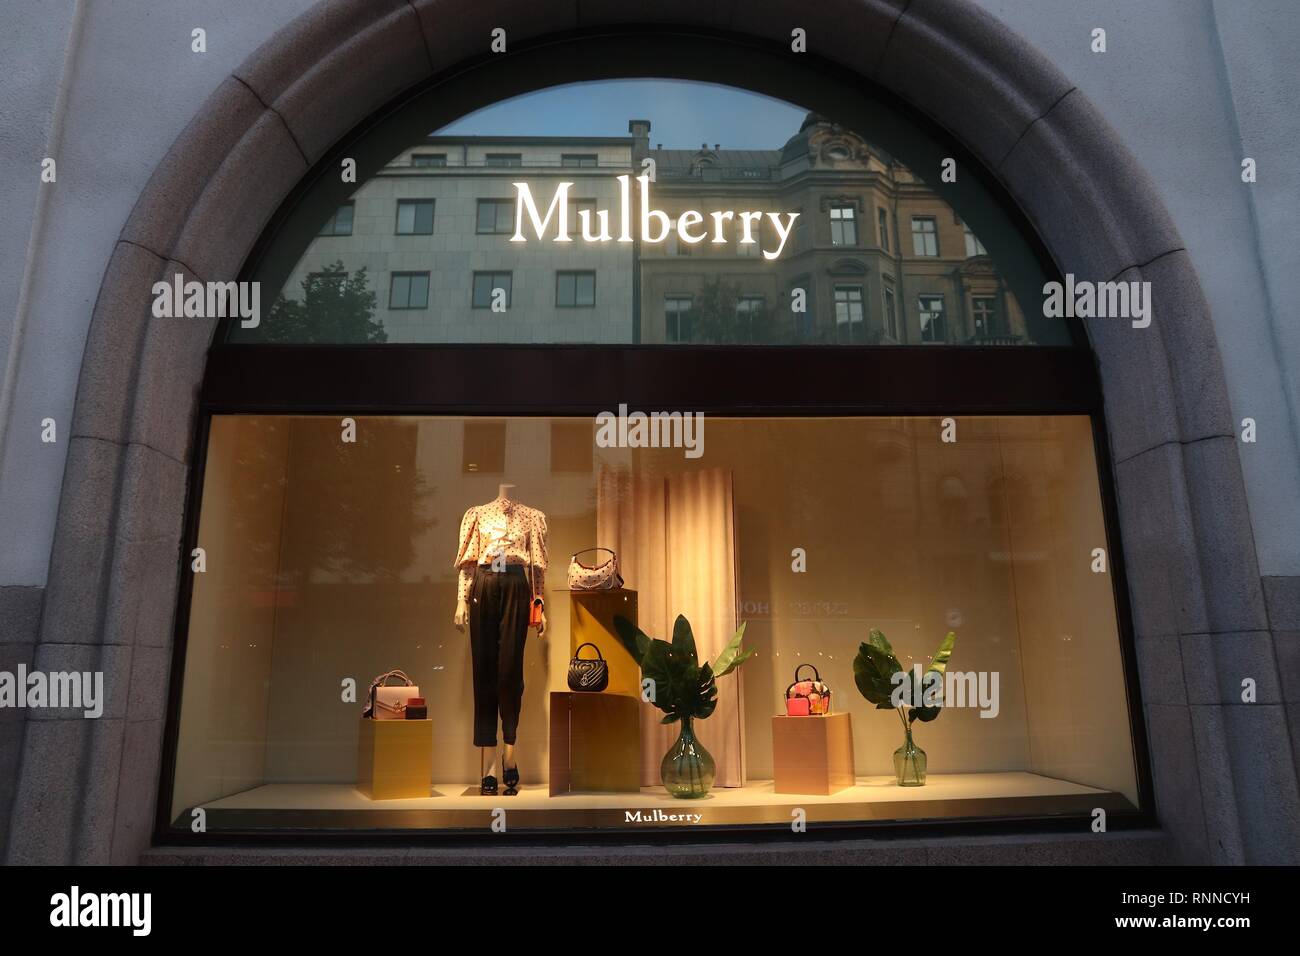 STOCKHOLM, SWEDEN - AUGUST 22, 2018: Mulberry fashion store in Stockholm, Sweden. Mulberry is a British luxury goods brand. Stock Photo